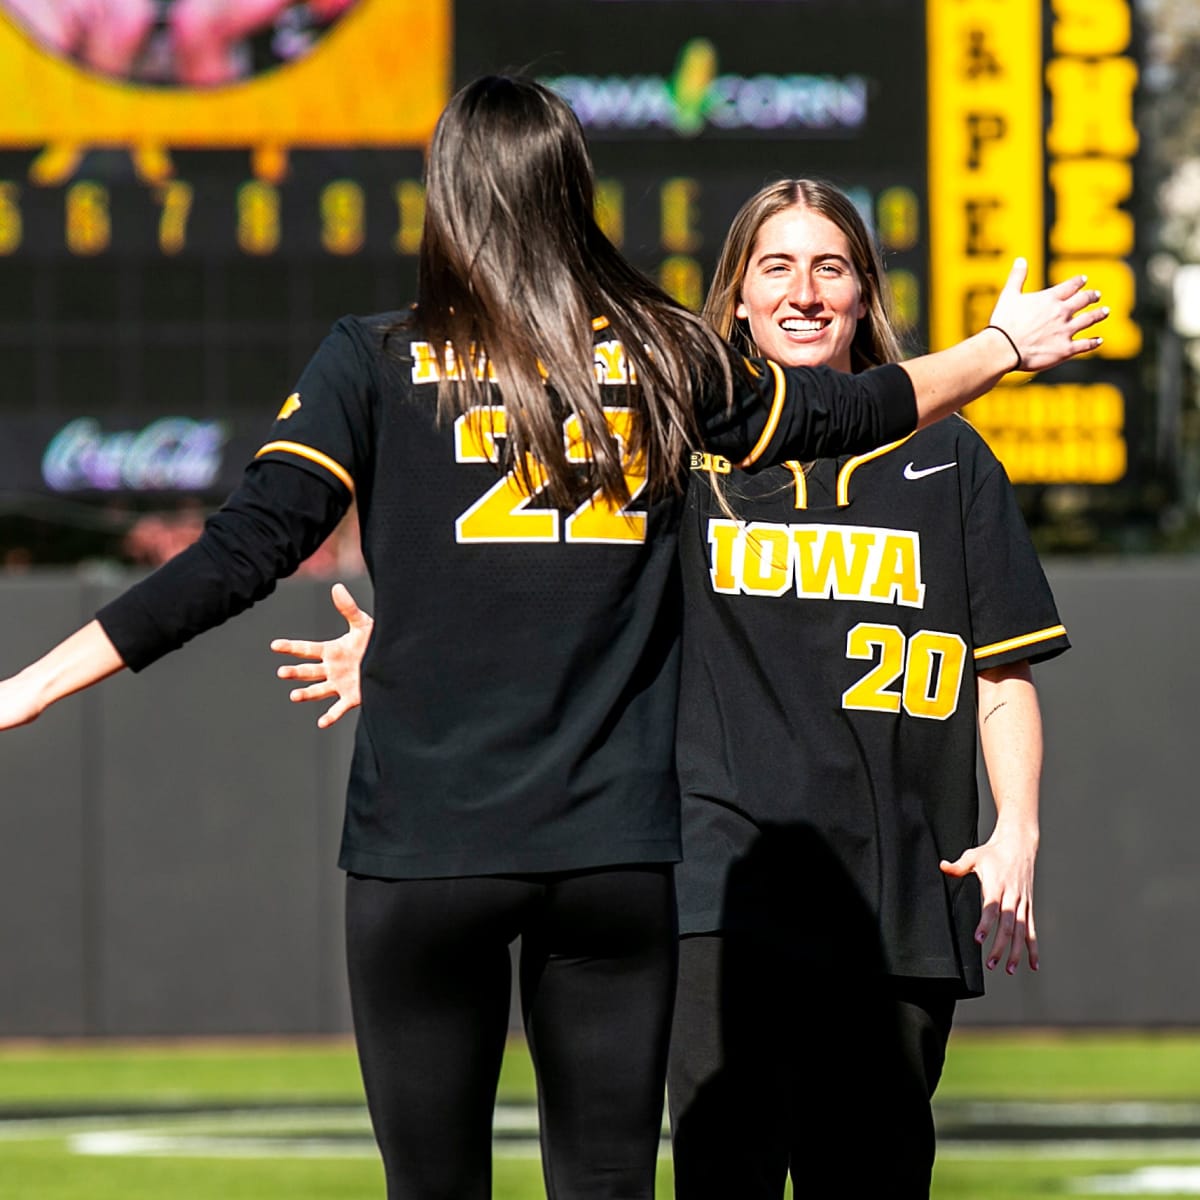 Iowa Hawkeyes Star Caitlin Clark Creates Buzz at Chicago Cubs Triple-A Game  - Sports Illustrated Inside The Cubs